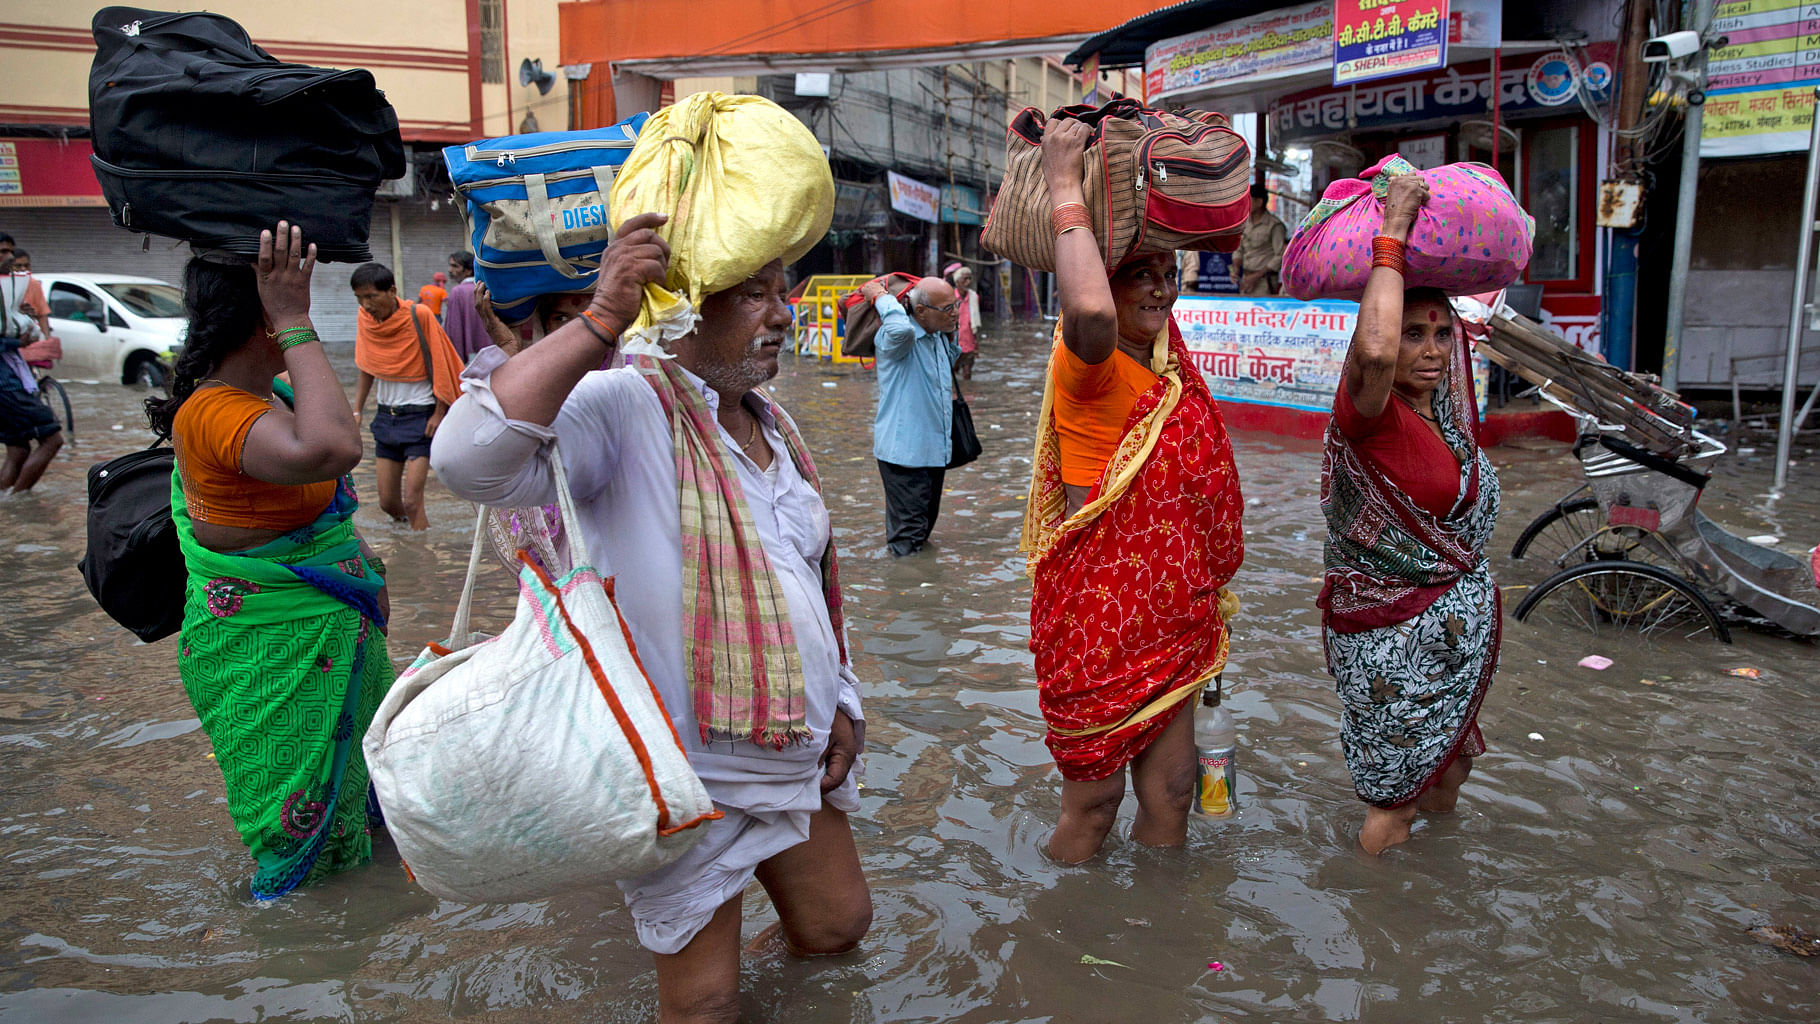 

Women and children in India’s flood-hit eastern region are at risk of being preyed upon by human traffickers. (Photo: AP)